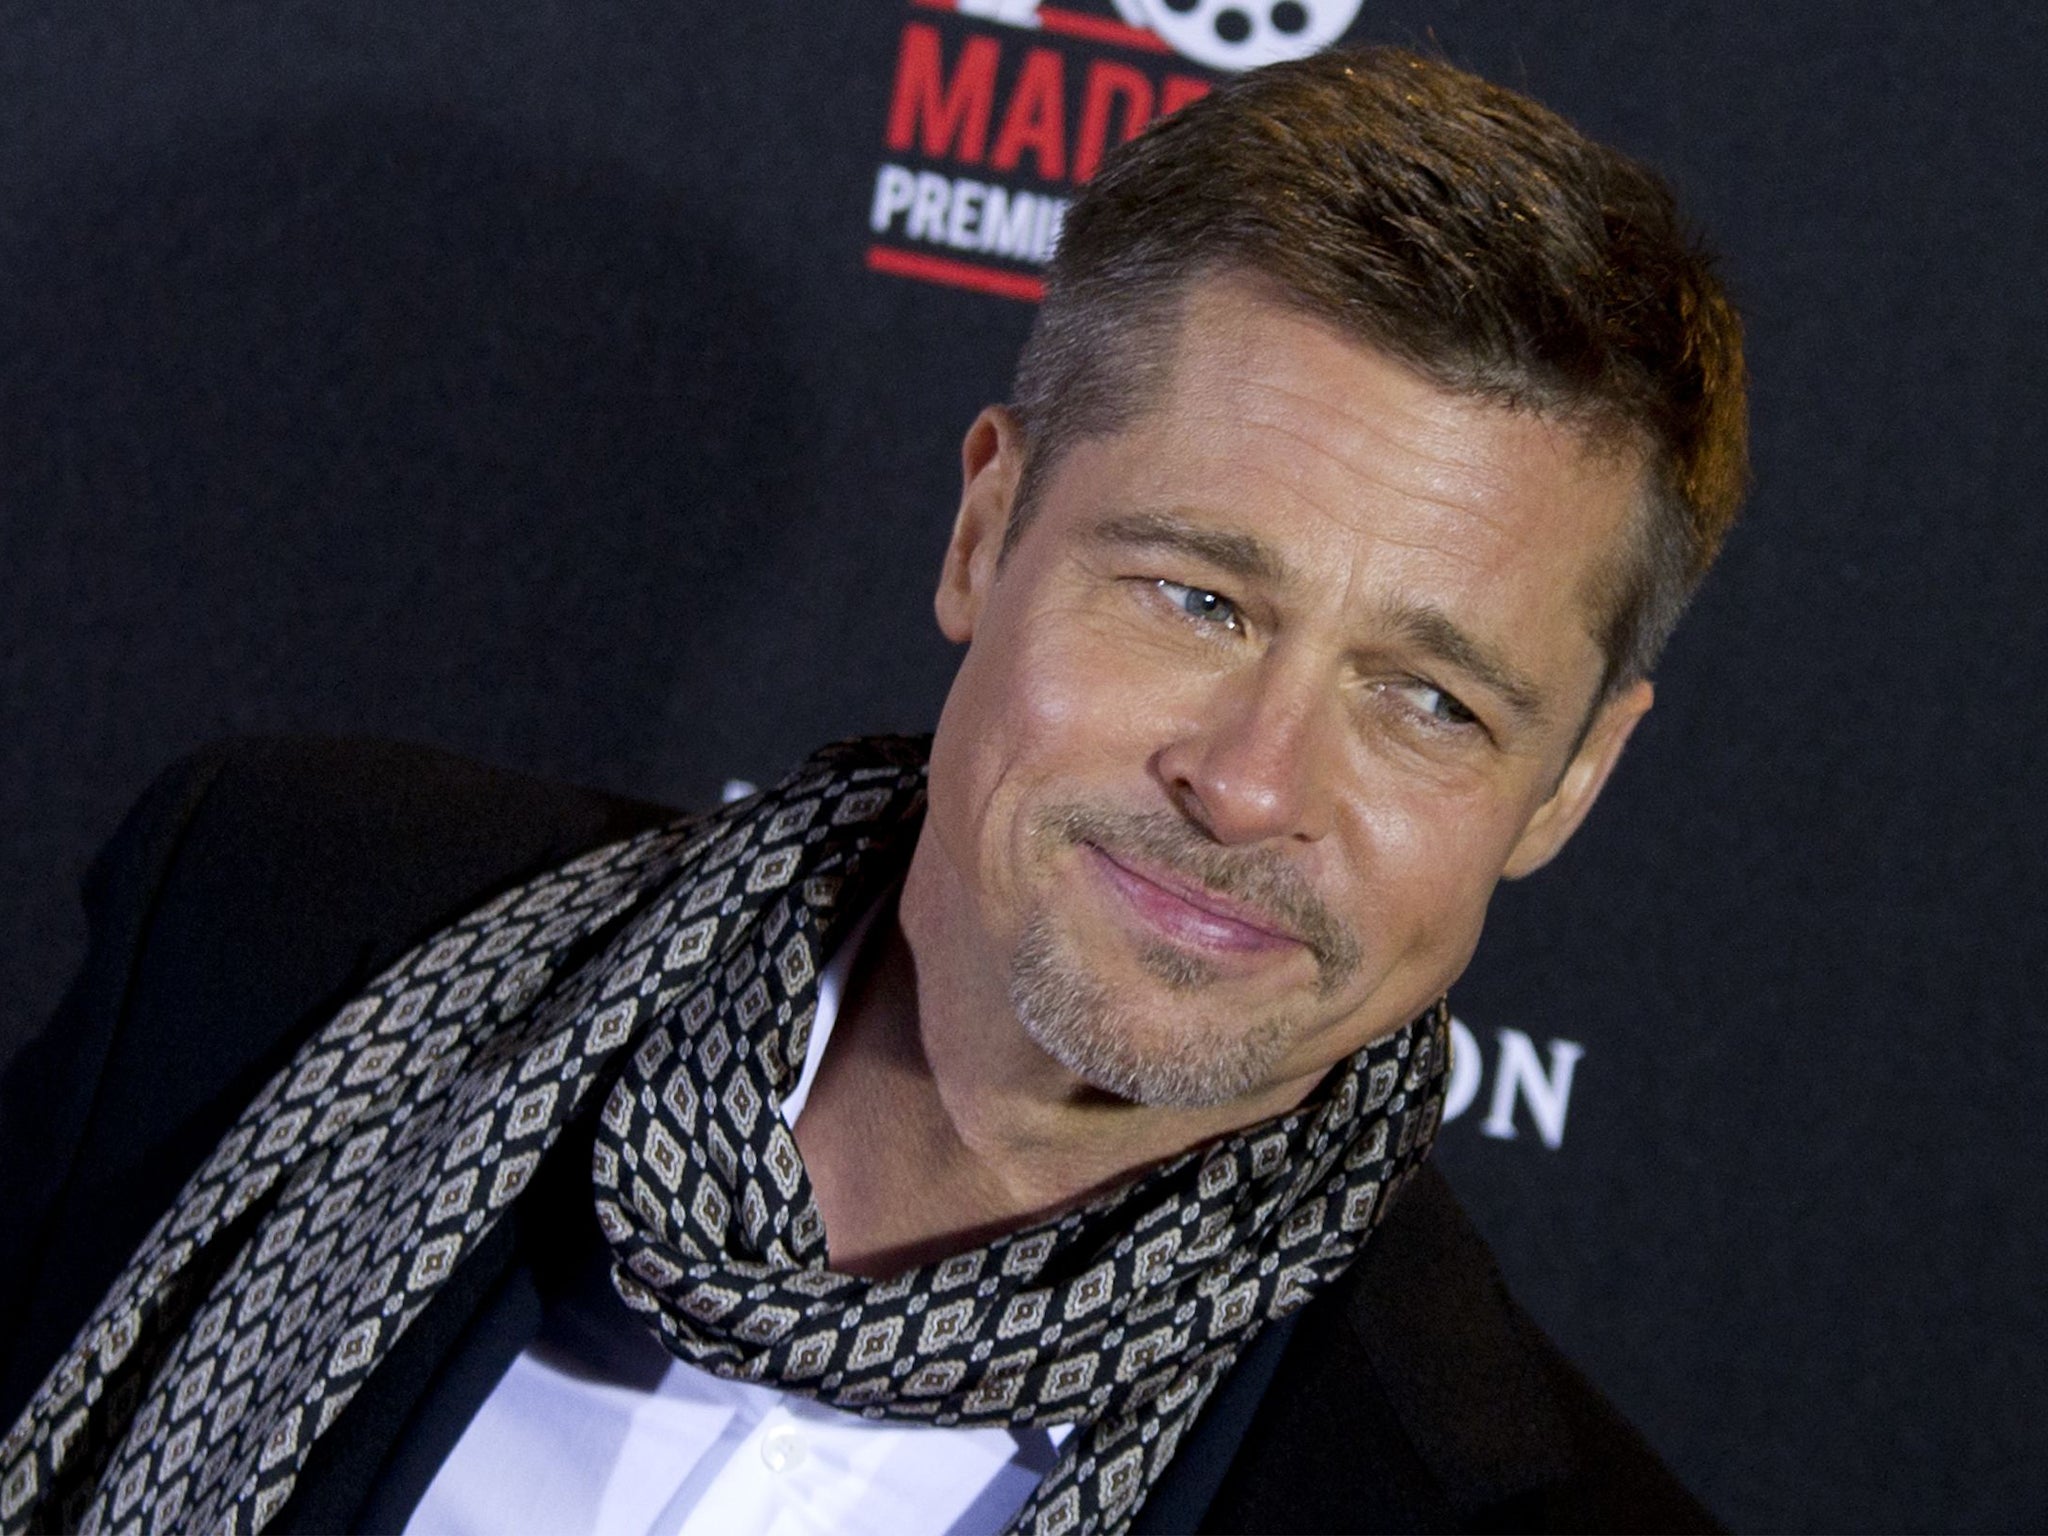 Brad Pitt attending the Madrid premiere of his new film Allied